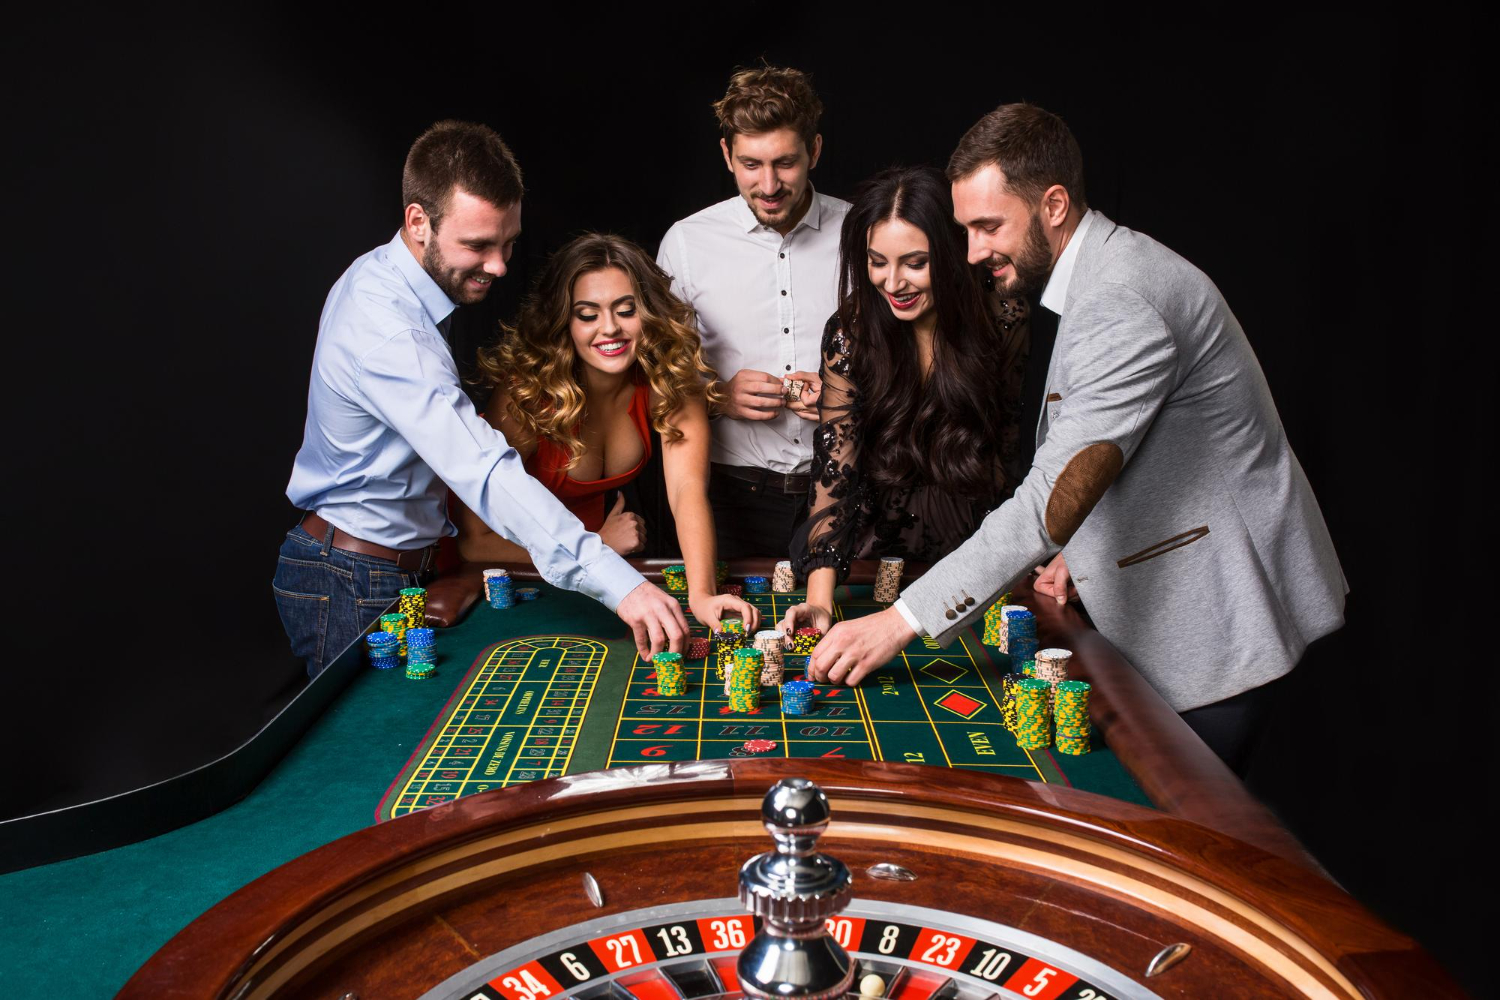 group-young-people-roulette-table-black-background-young-people-are-betting-game